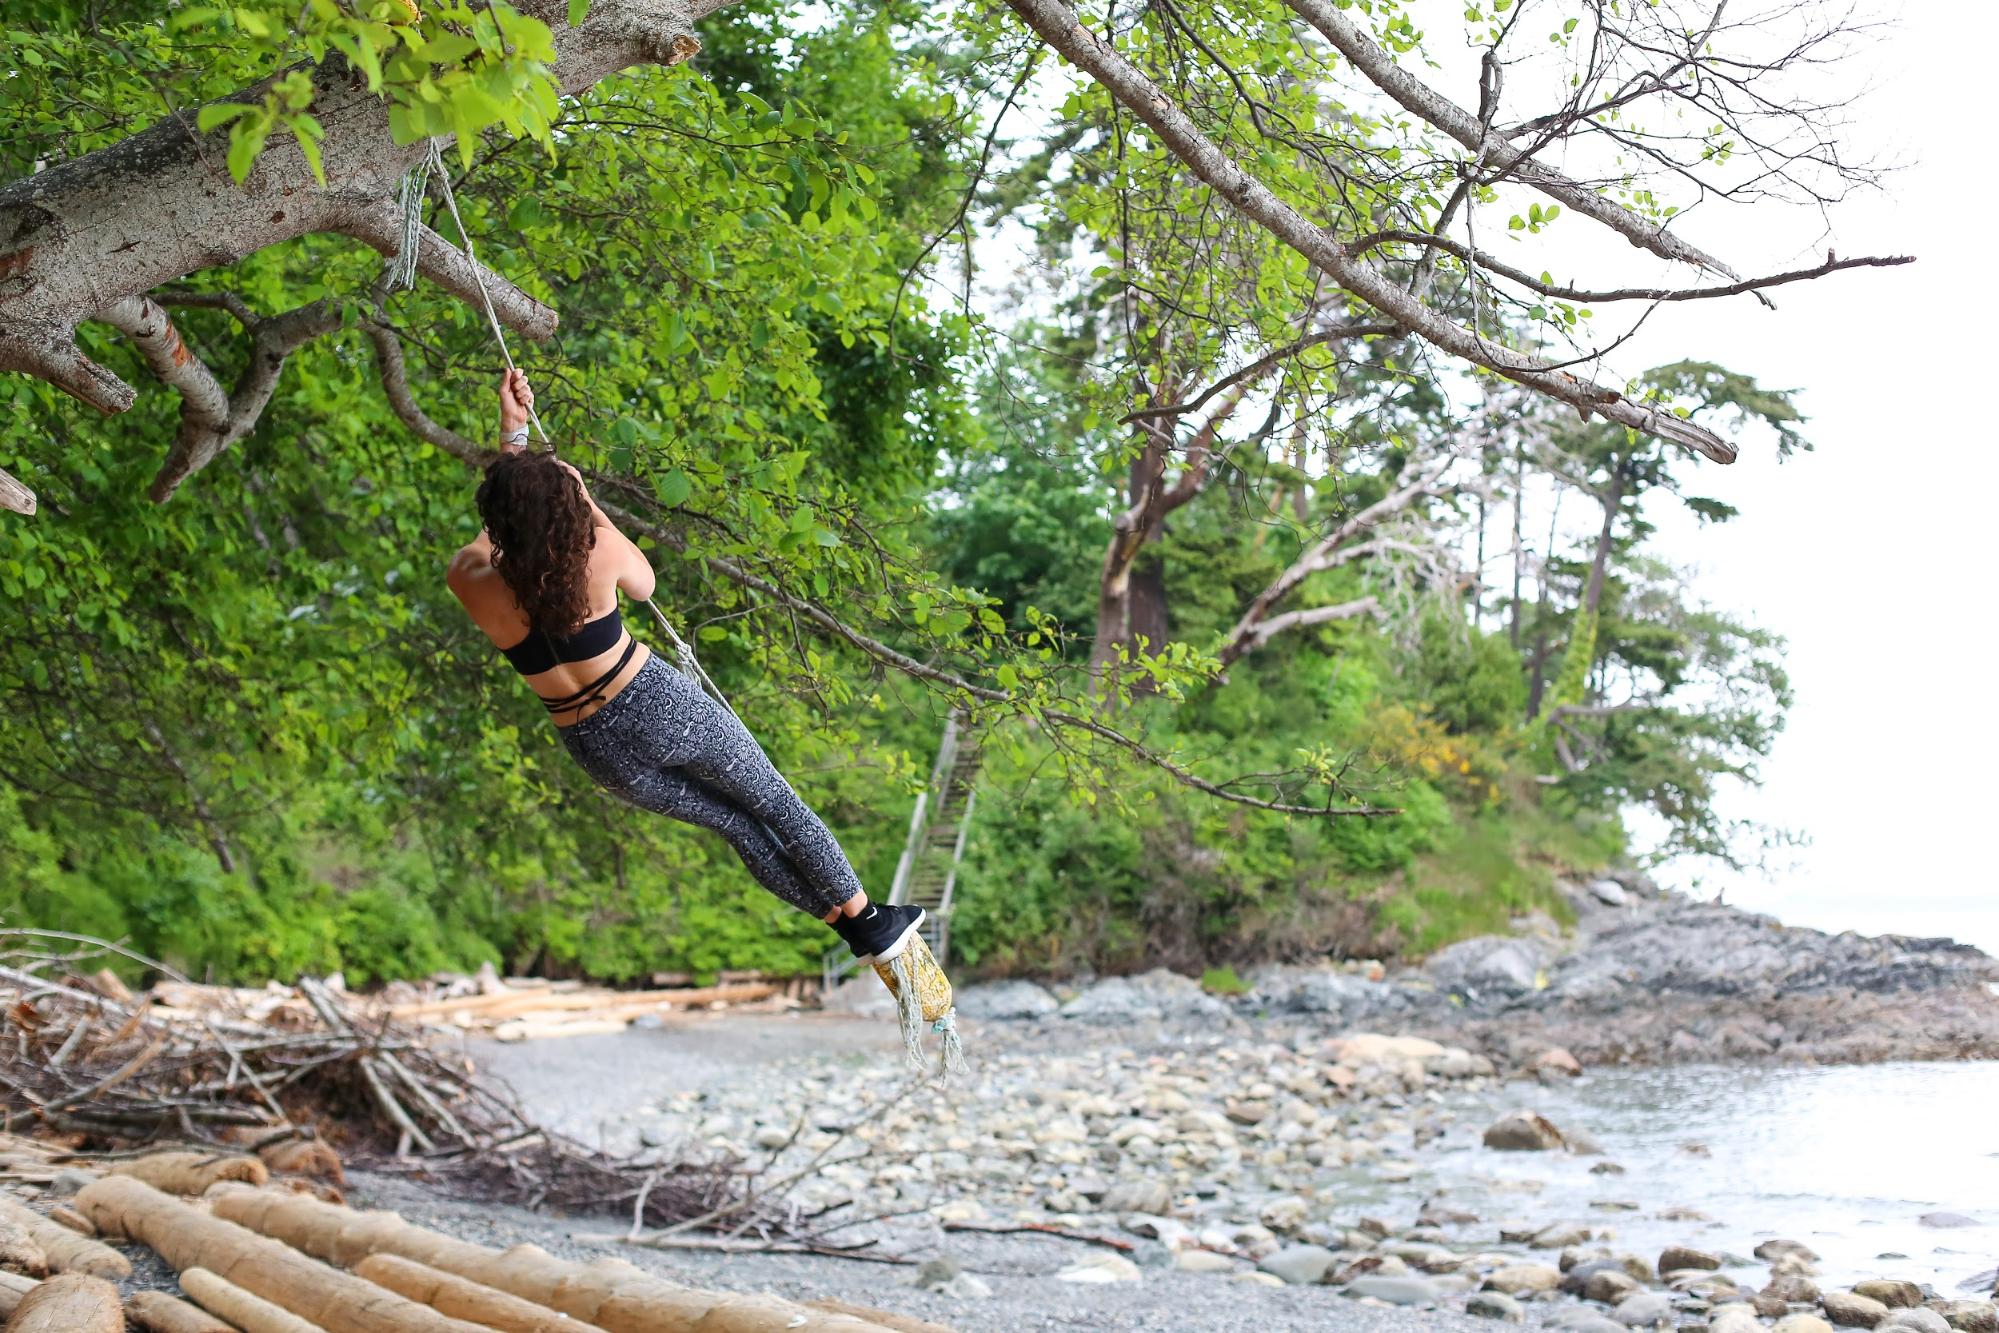 A woman swings from a rope tied to a tree over a rocky riverbank.